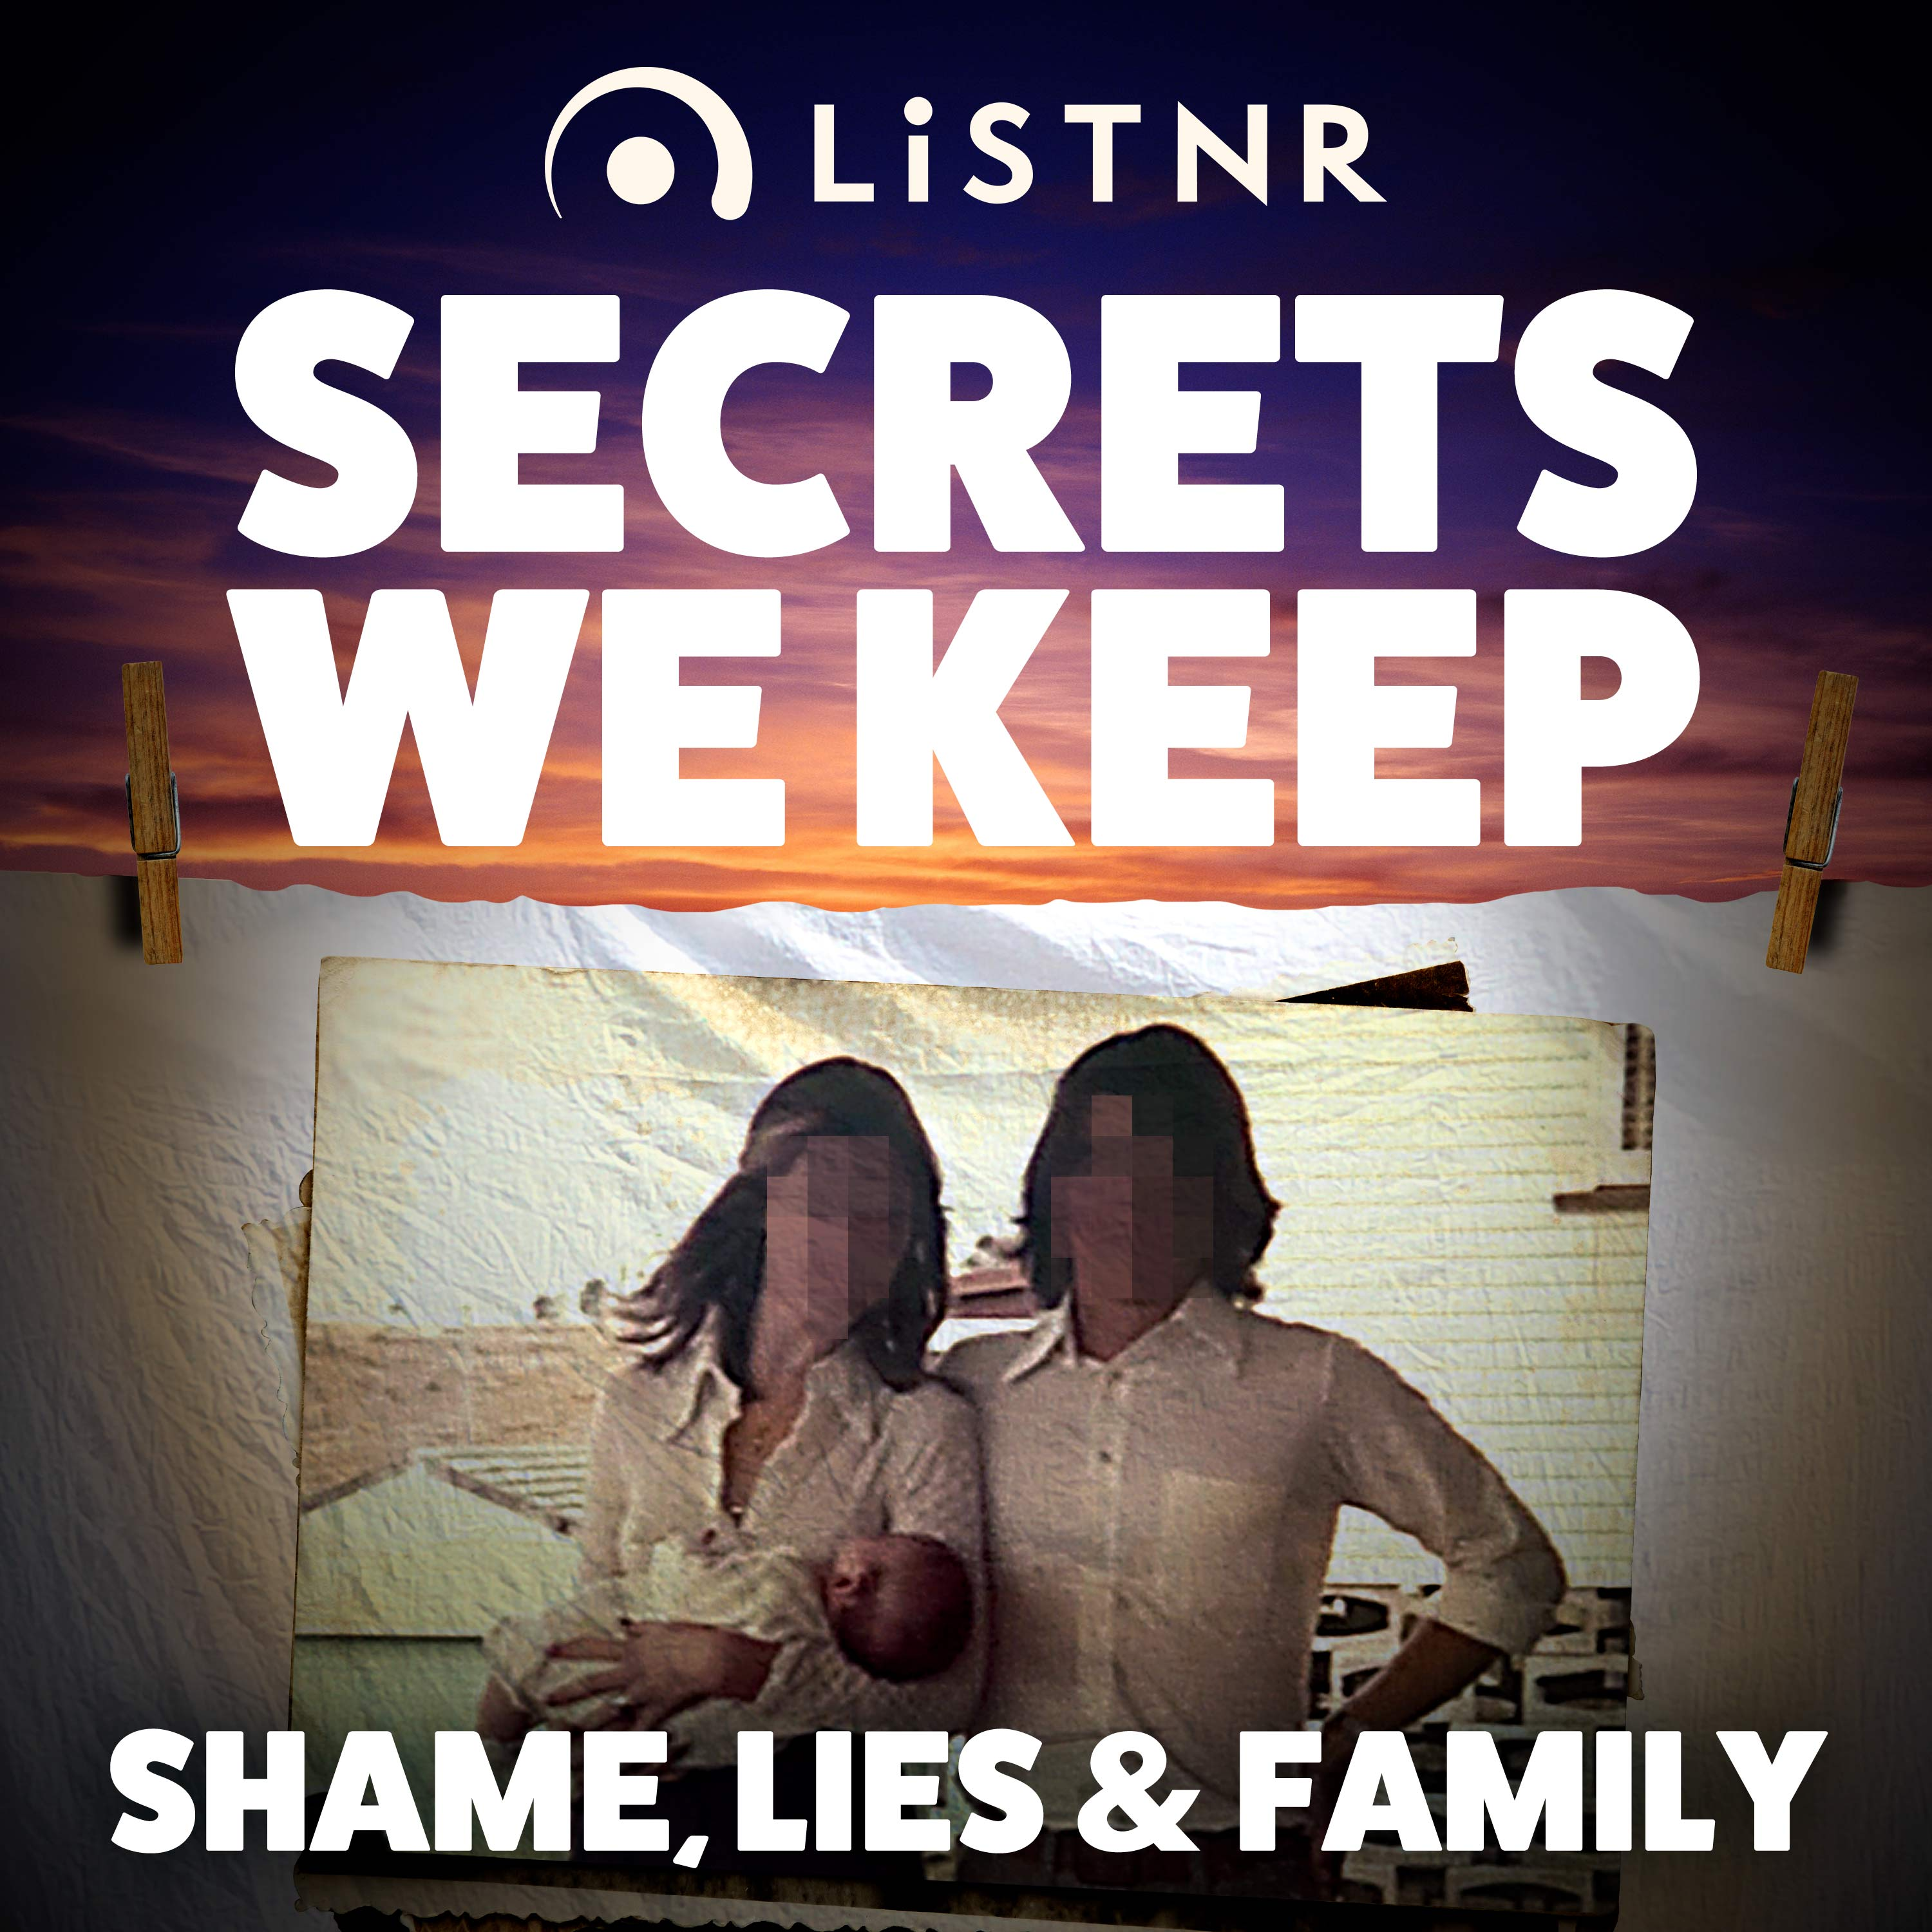 Shame, Lies & Family - Welcome to Cairns